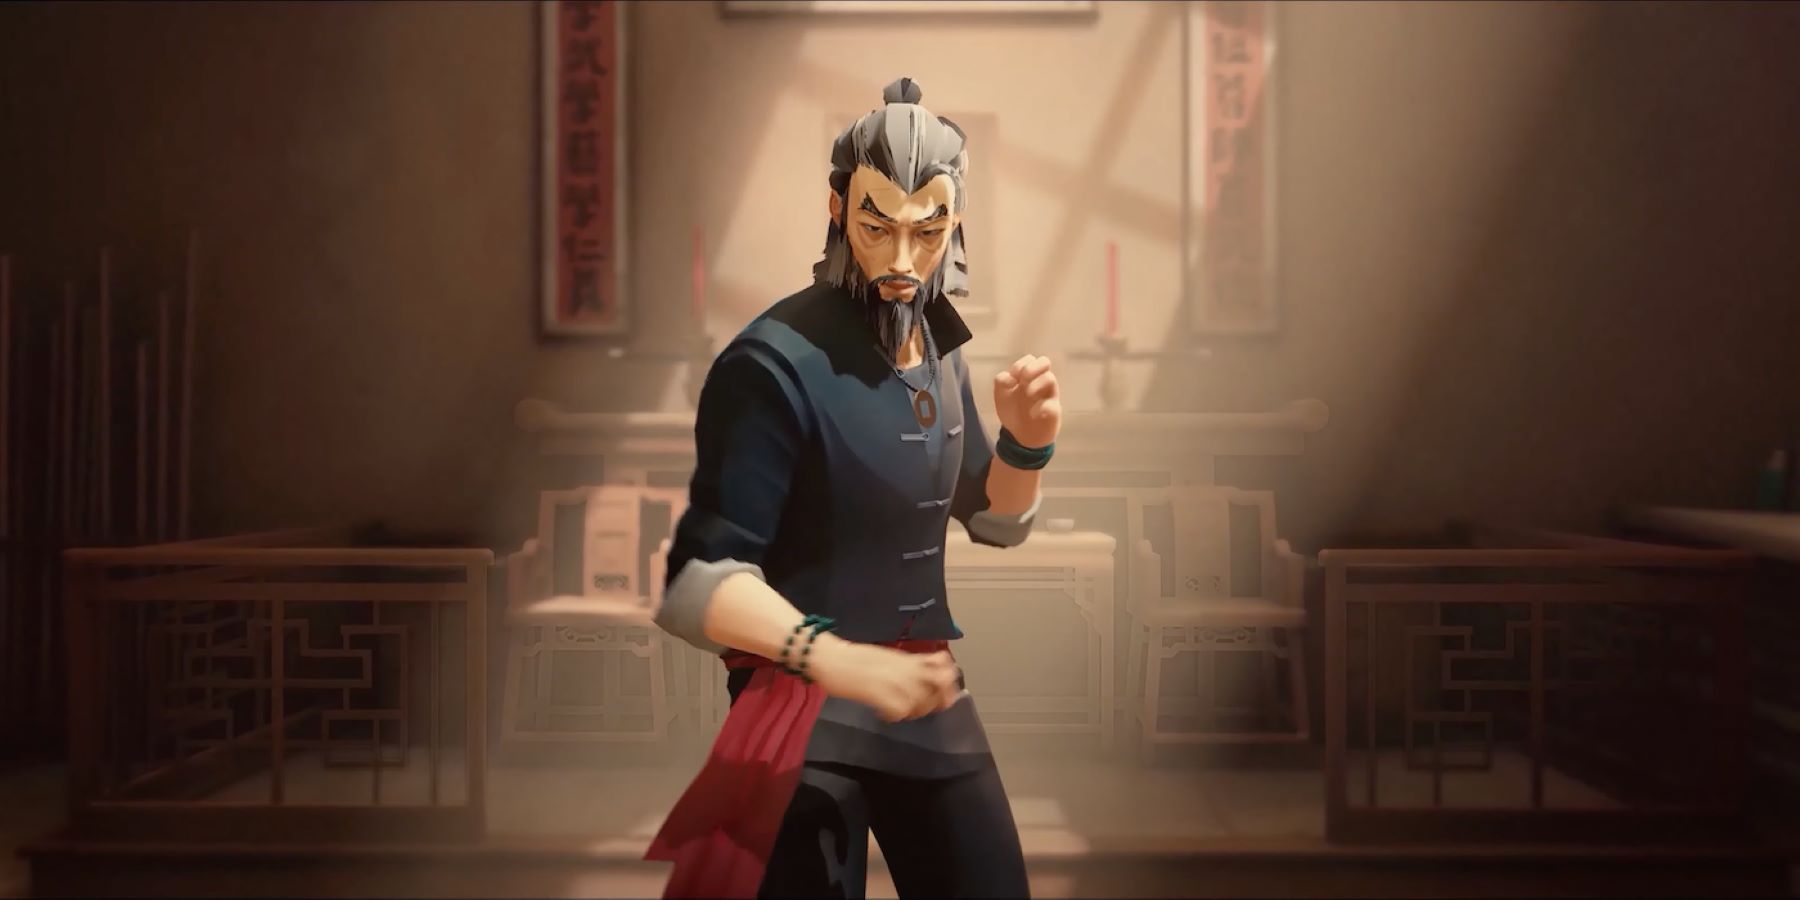 The protagonist of Sifu at late middle age standing in an empty room